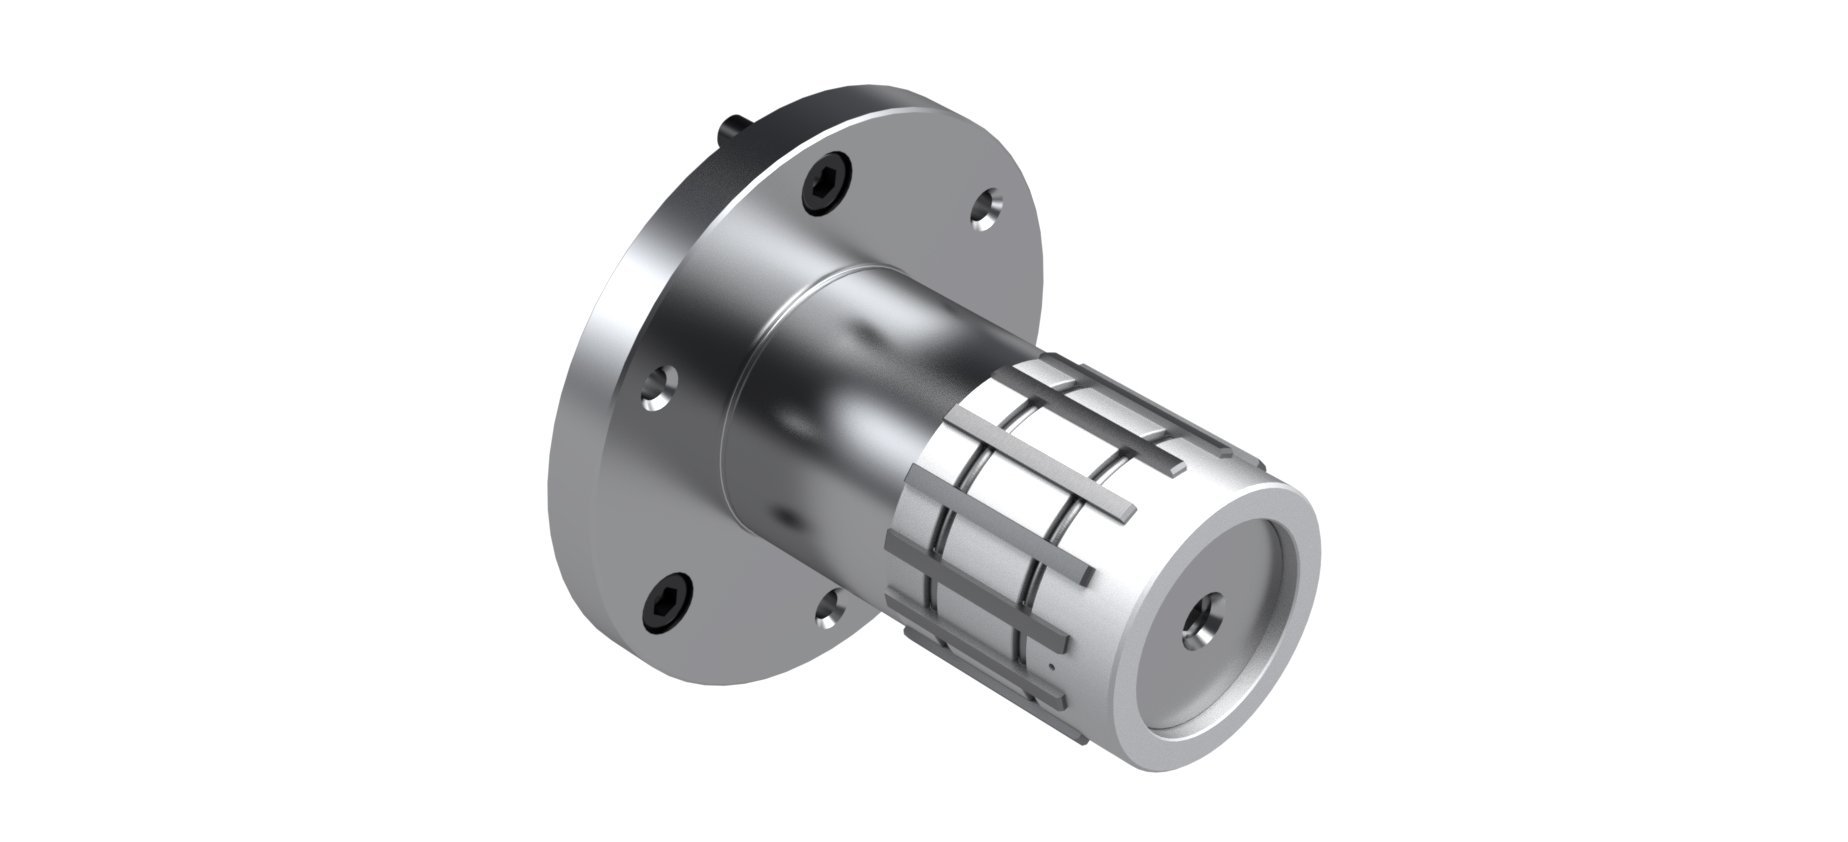 Wide clamping range with perfect clamping geometry ensures tight manufacturing tolerances